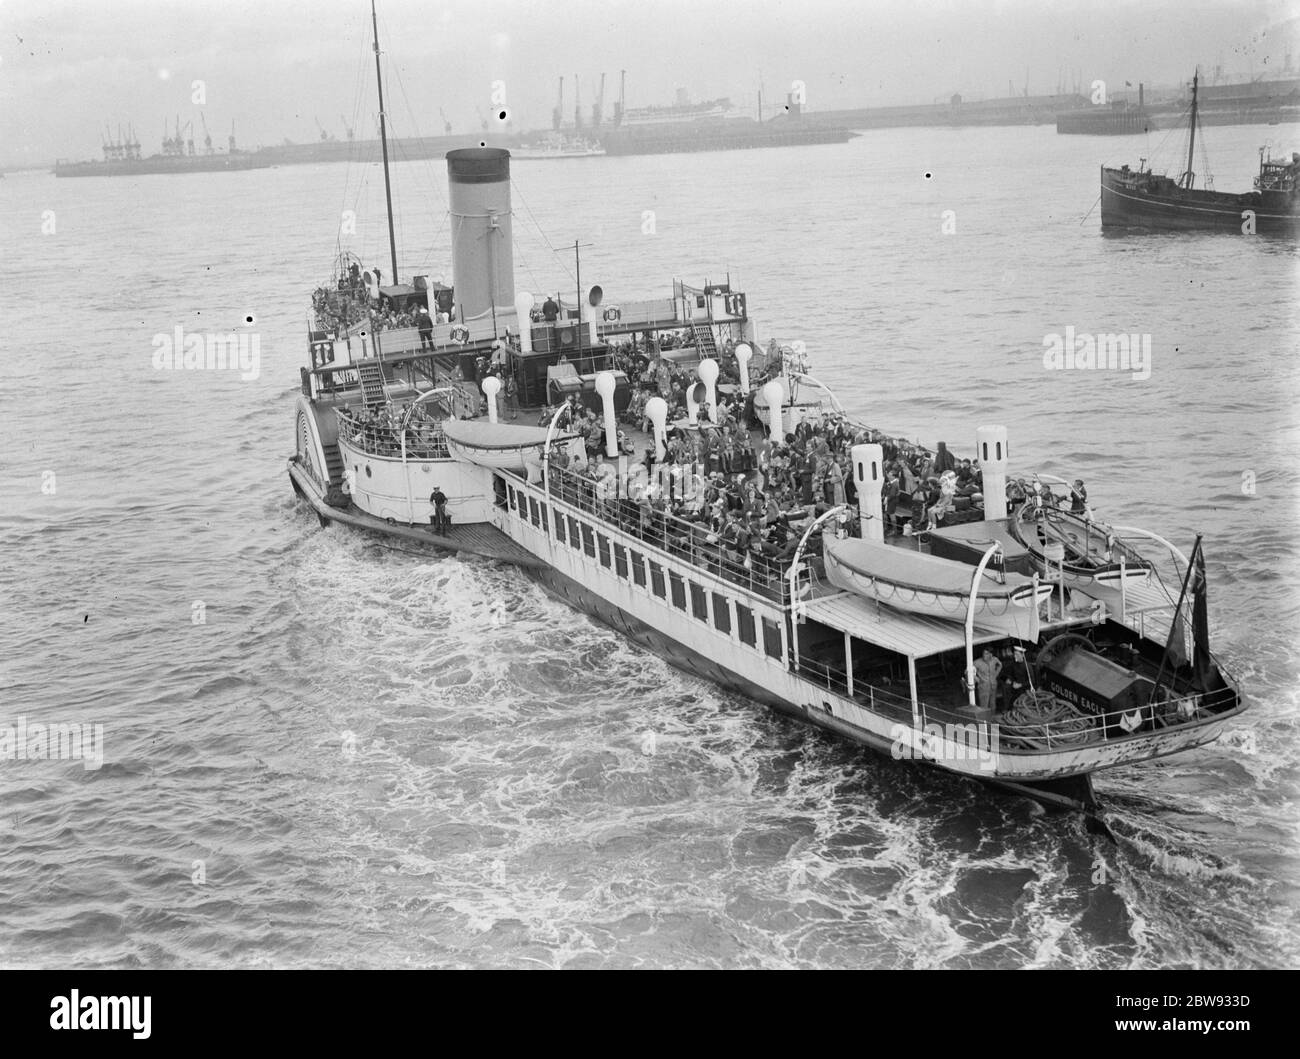 In response to the dangers of war the British government launched a scheme to evacuate the children from major urban centers to private housing in more rural areas . Photo shows the evacuation by ship over the river Thames at Gravesend , Kent . 1939 Stock Photo